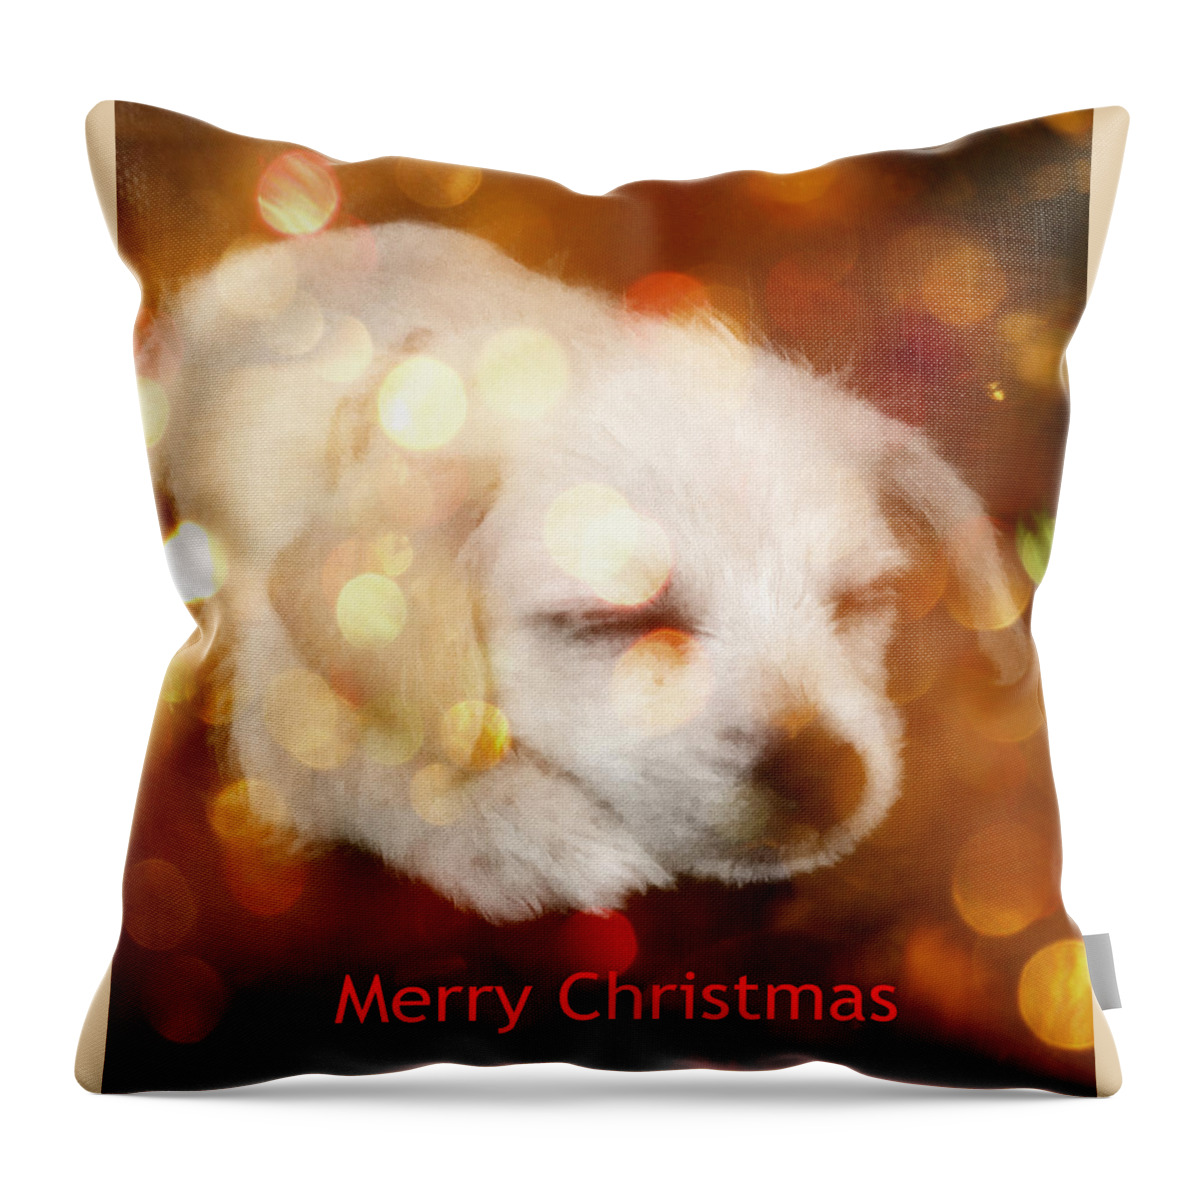 Christmas Puppy Throw Pillow featuring the photograph Christmas Puppy by Amanda Eberly